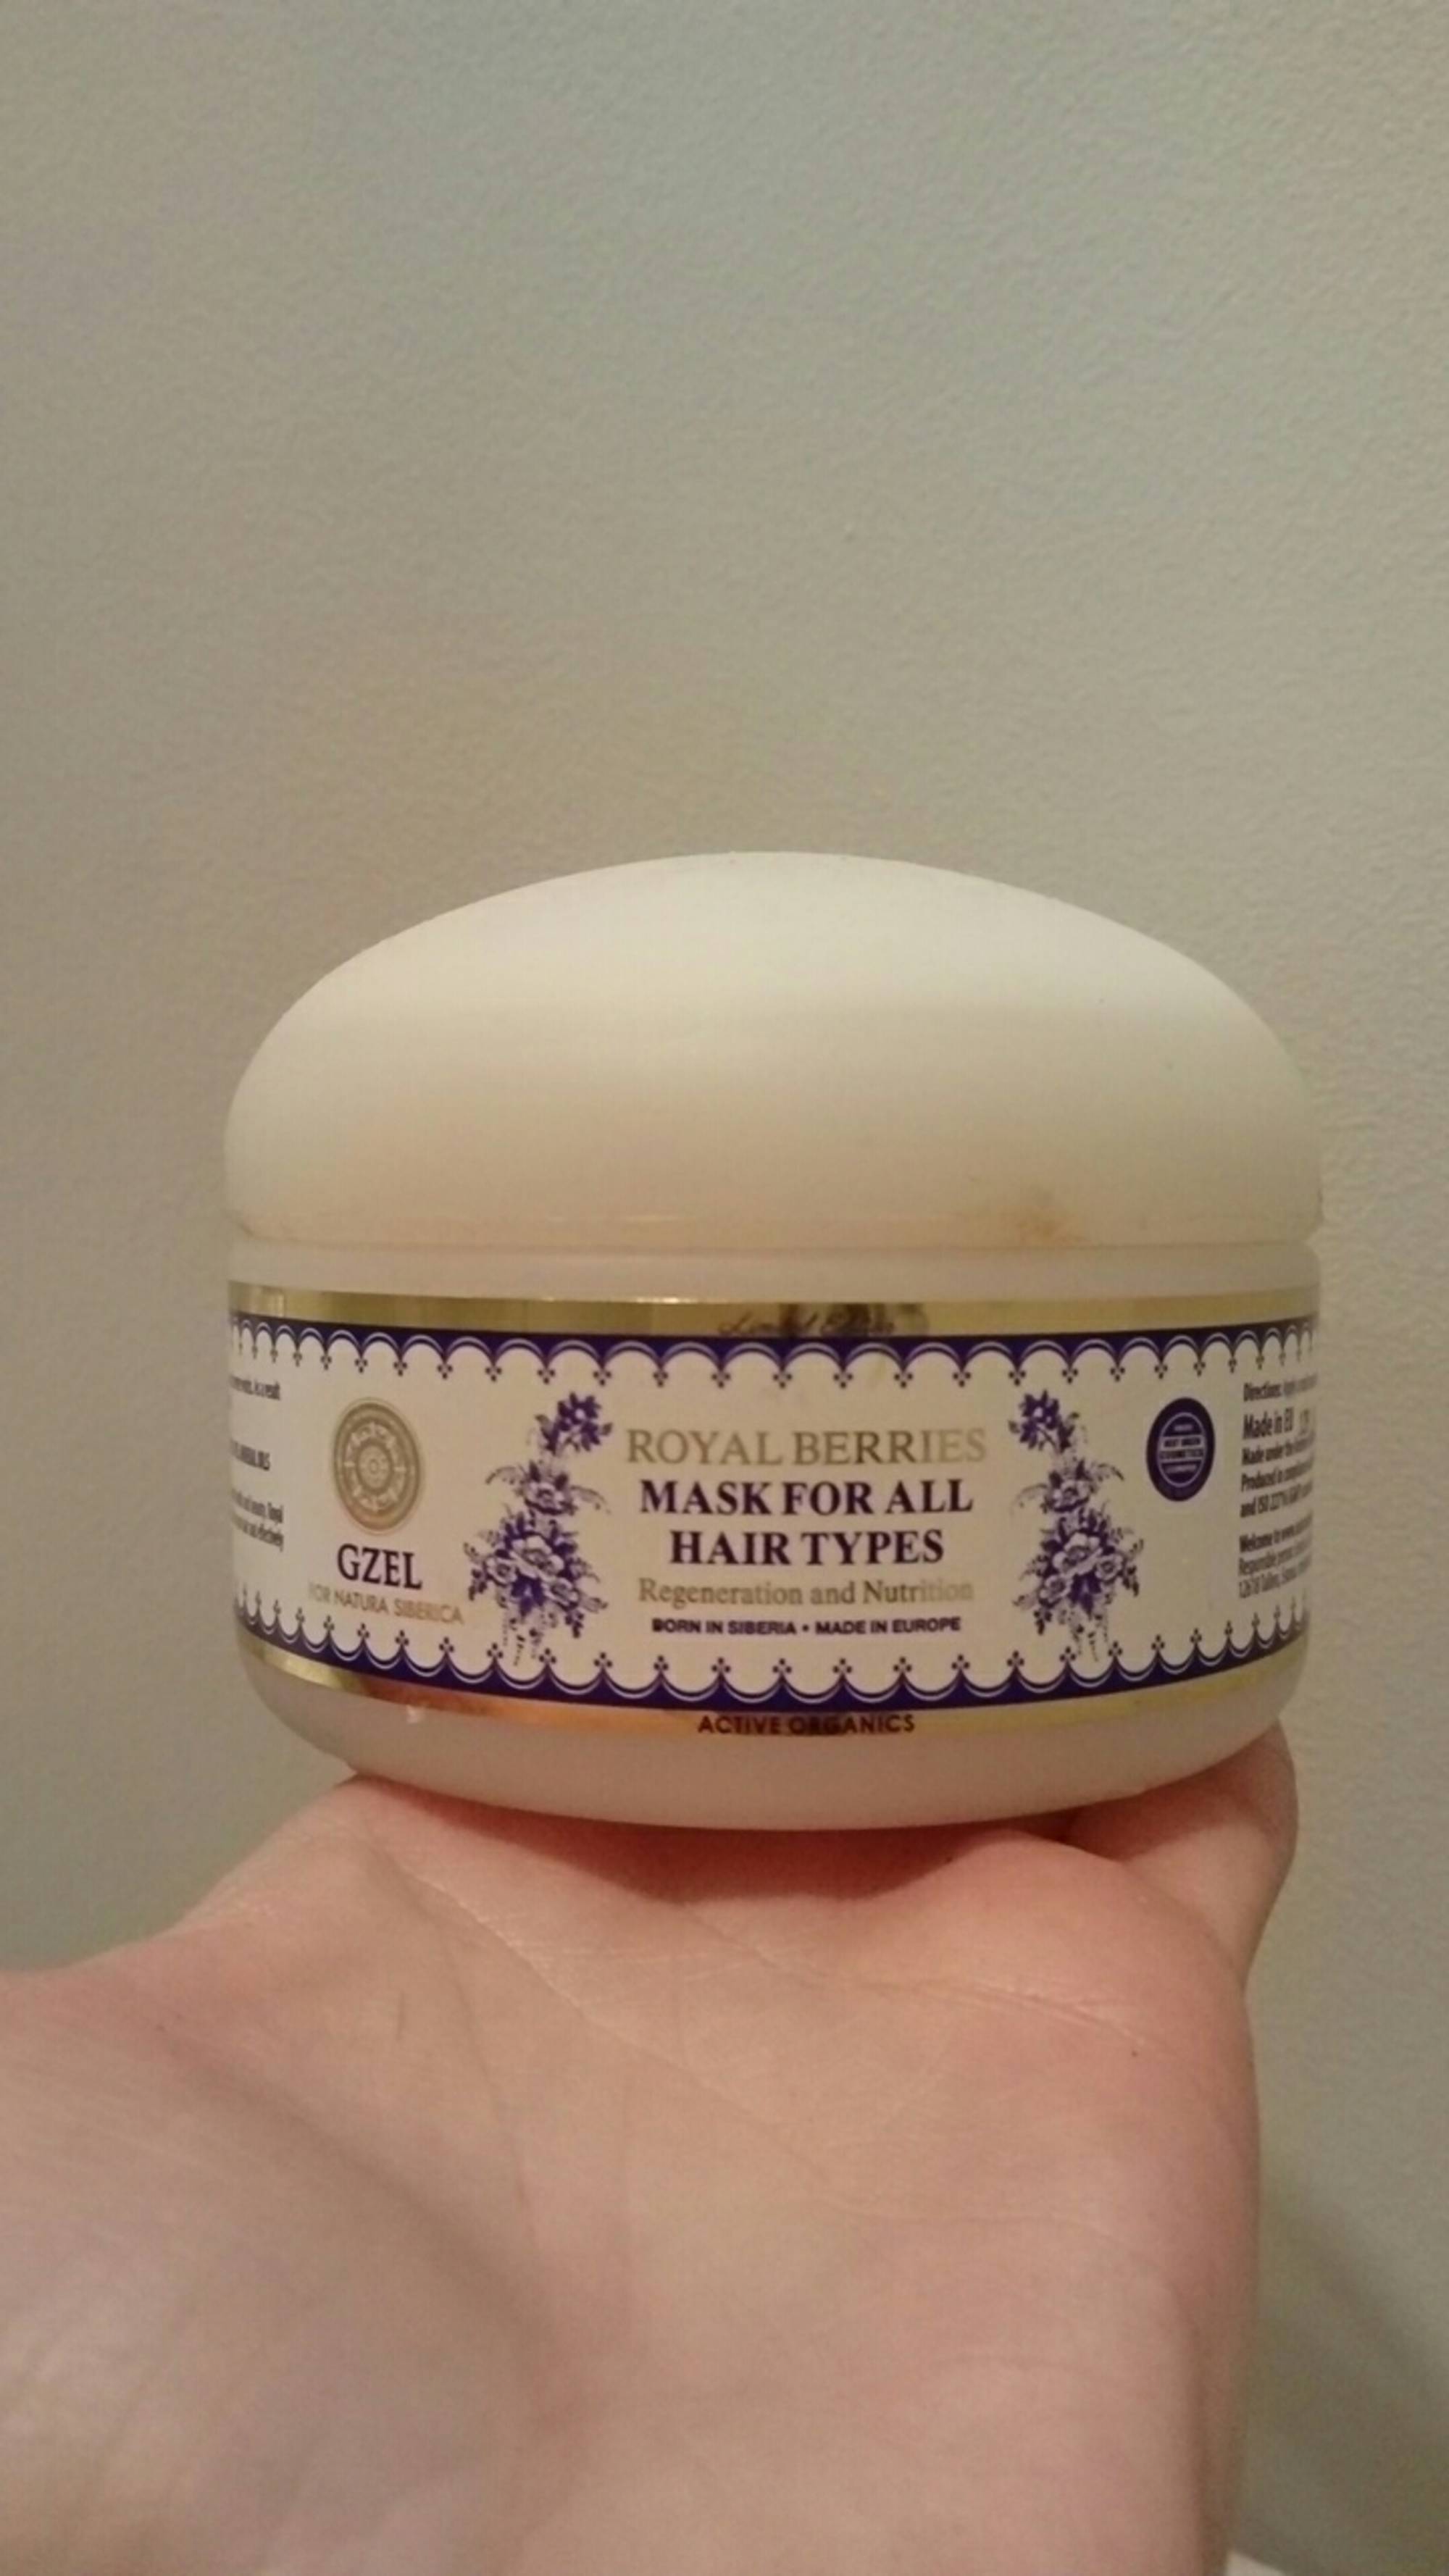 NATURA SIBERICA - Gzel Royal Berries - Mask for all hair types